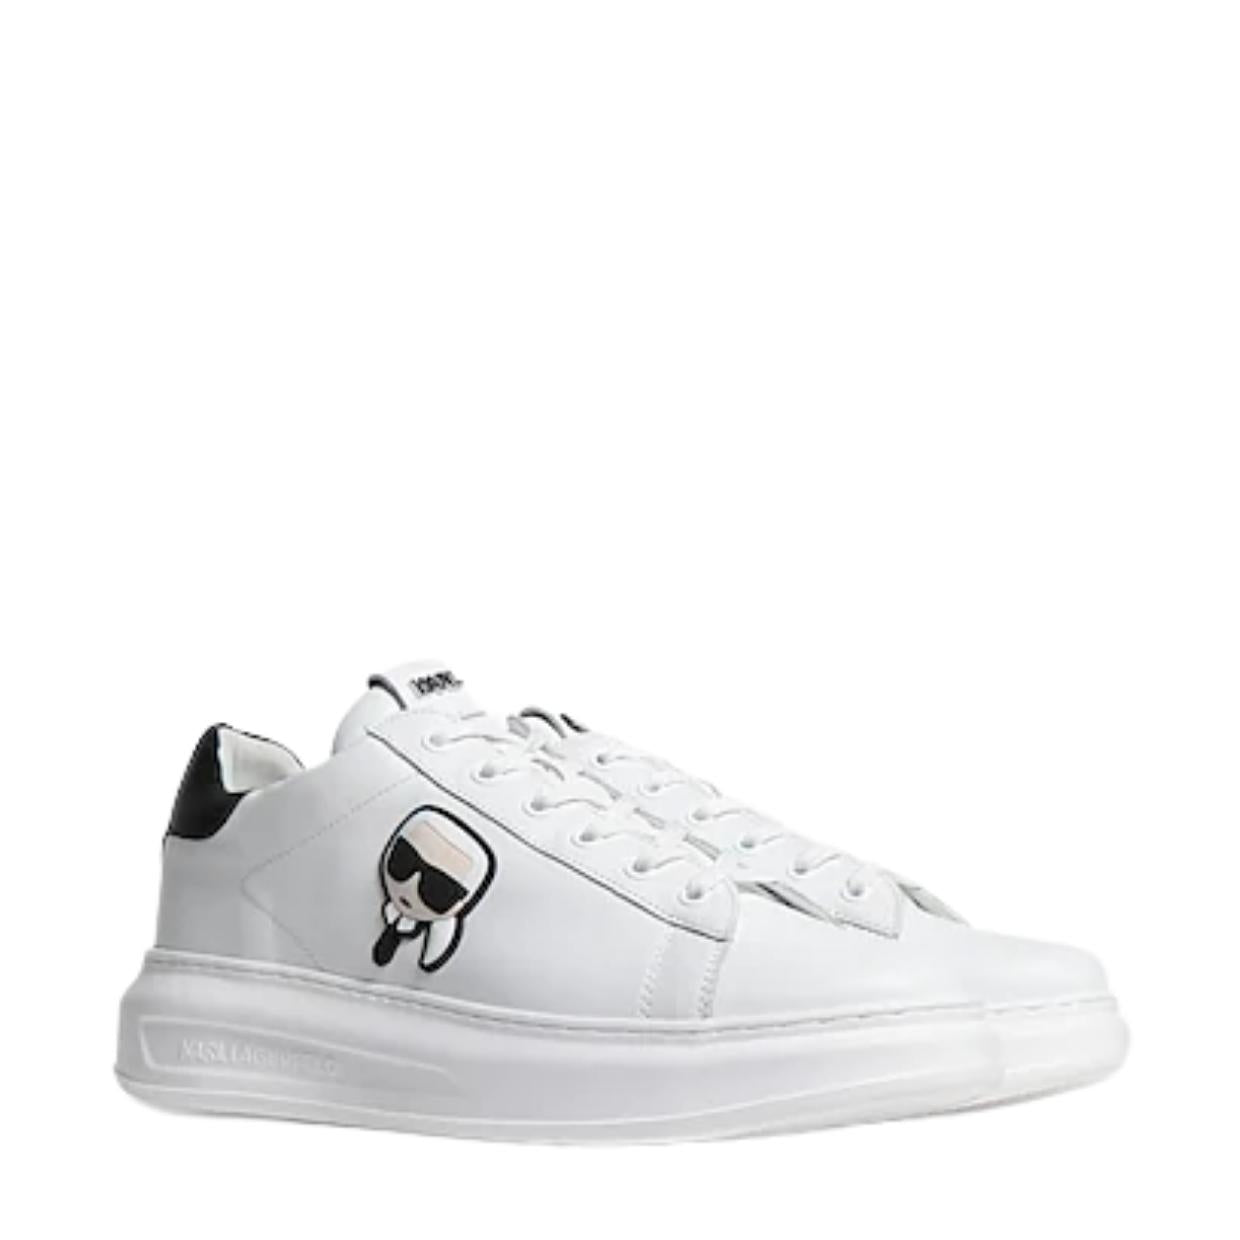 Karl Lagerfeld Ikonic 3D White Trainers